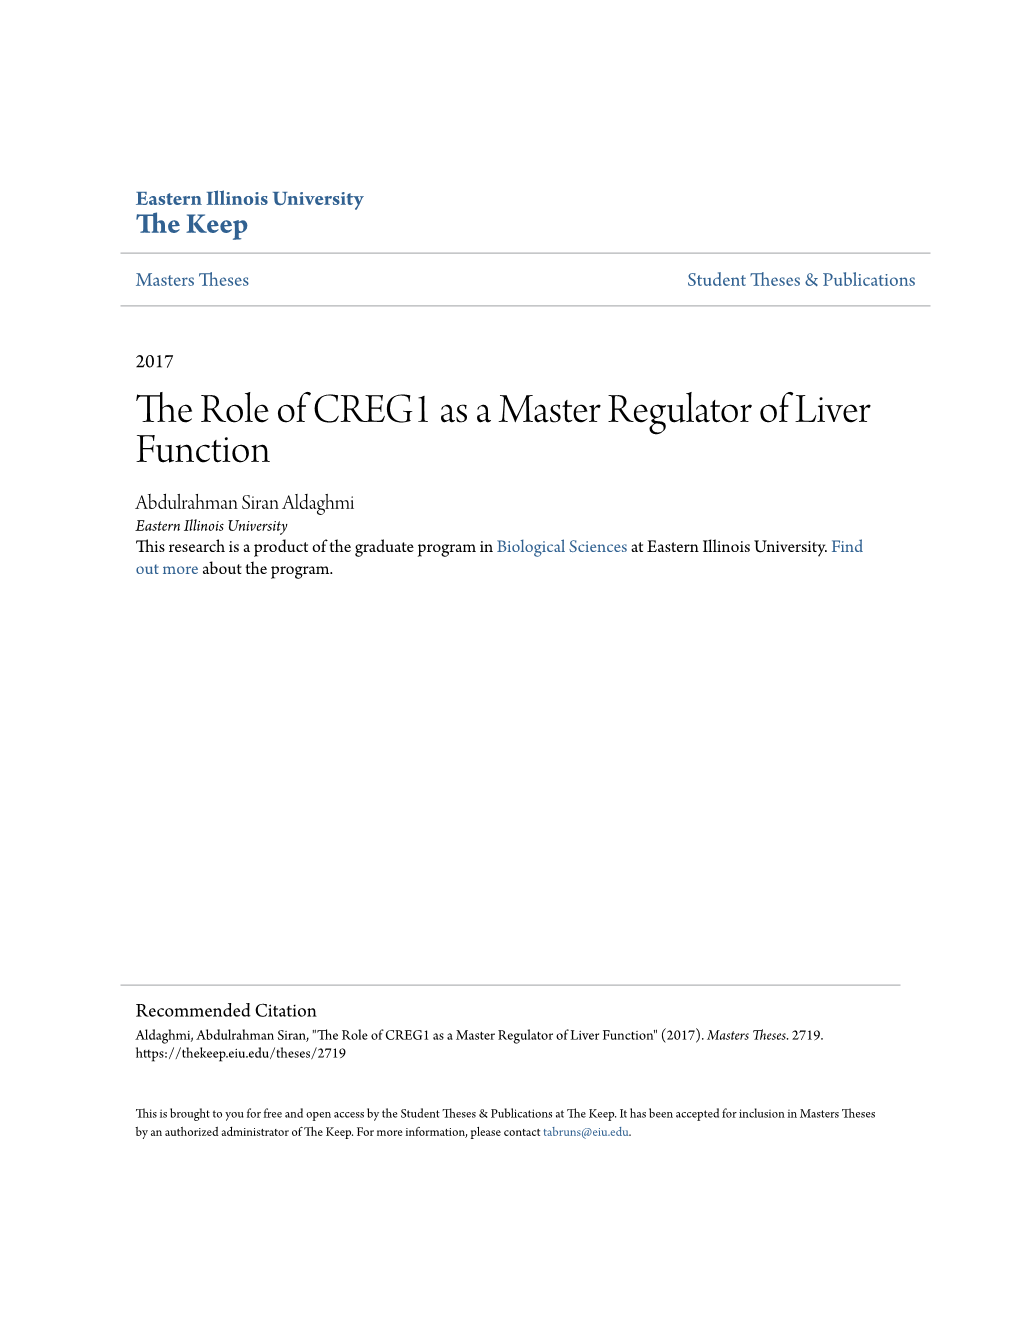 The Role of CREG1 As a Master Regulator of Liver Function